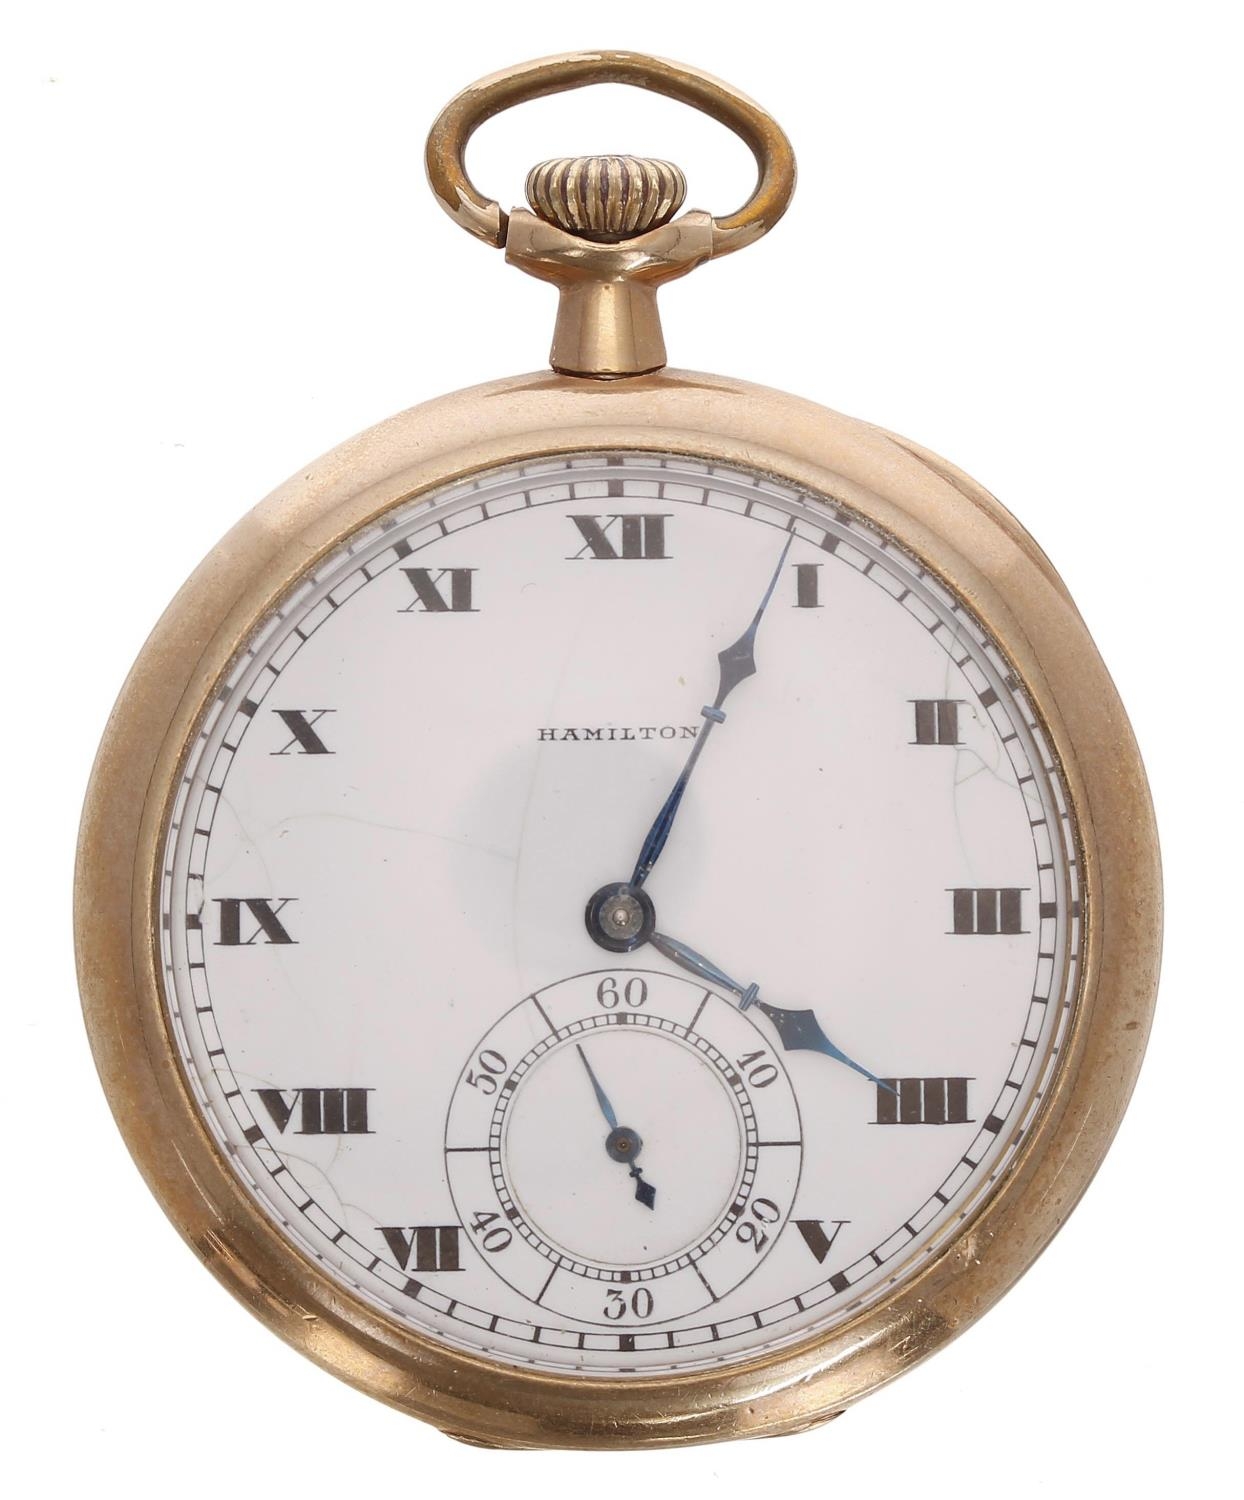 Hamilton Watch Co. gold plated lever dress pocket watch, circa 1921, serial no. 1819117, signed cal. - Image 2 of 4